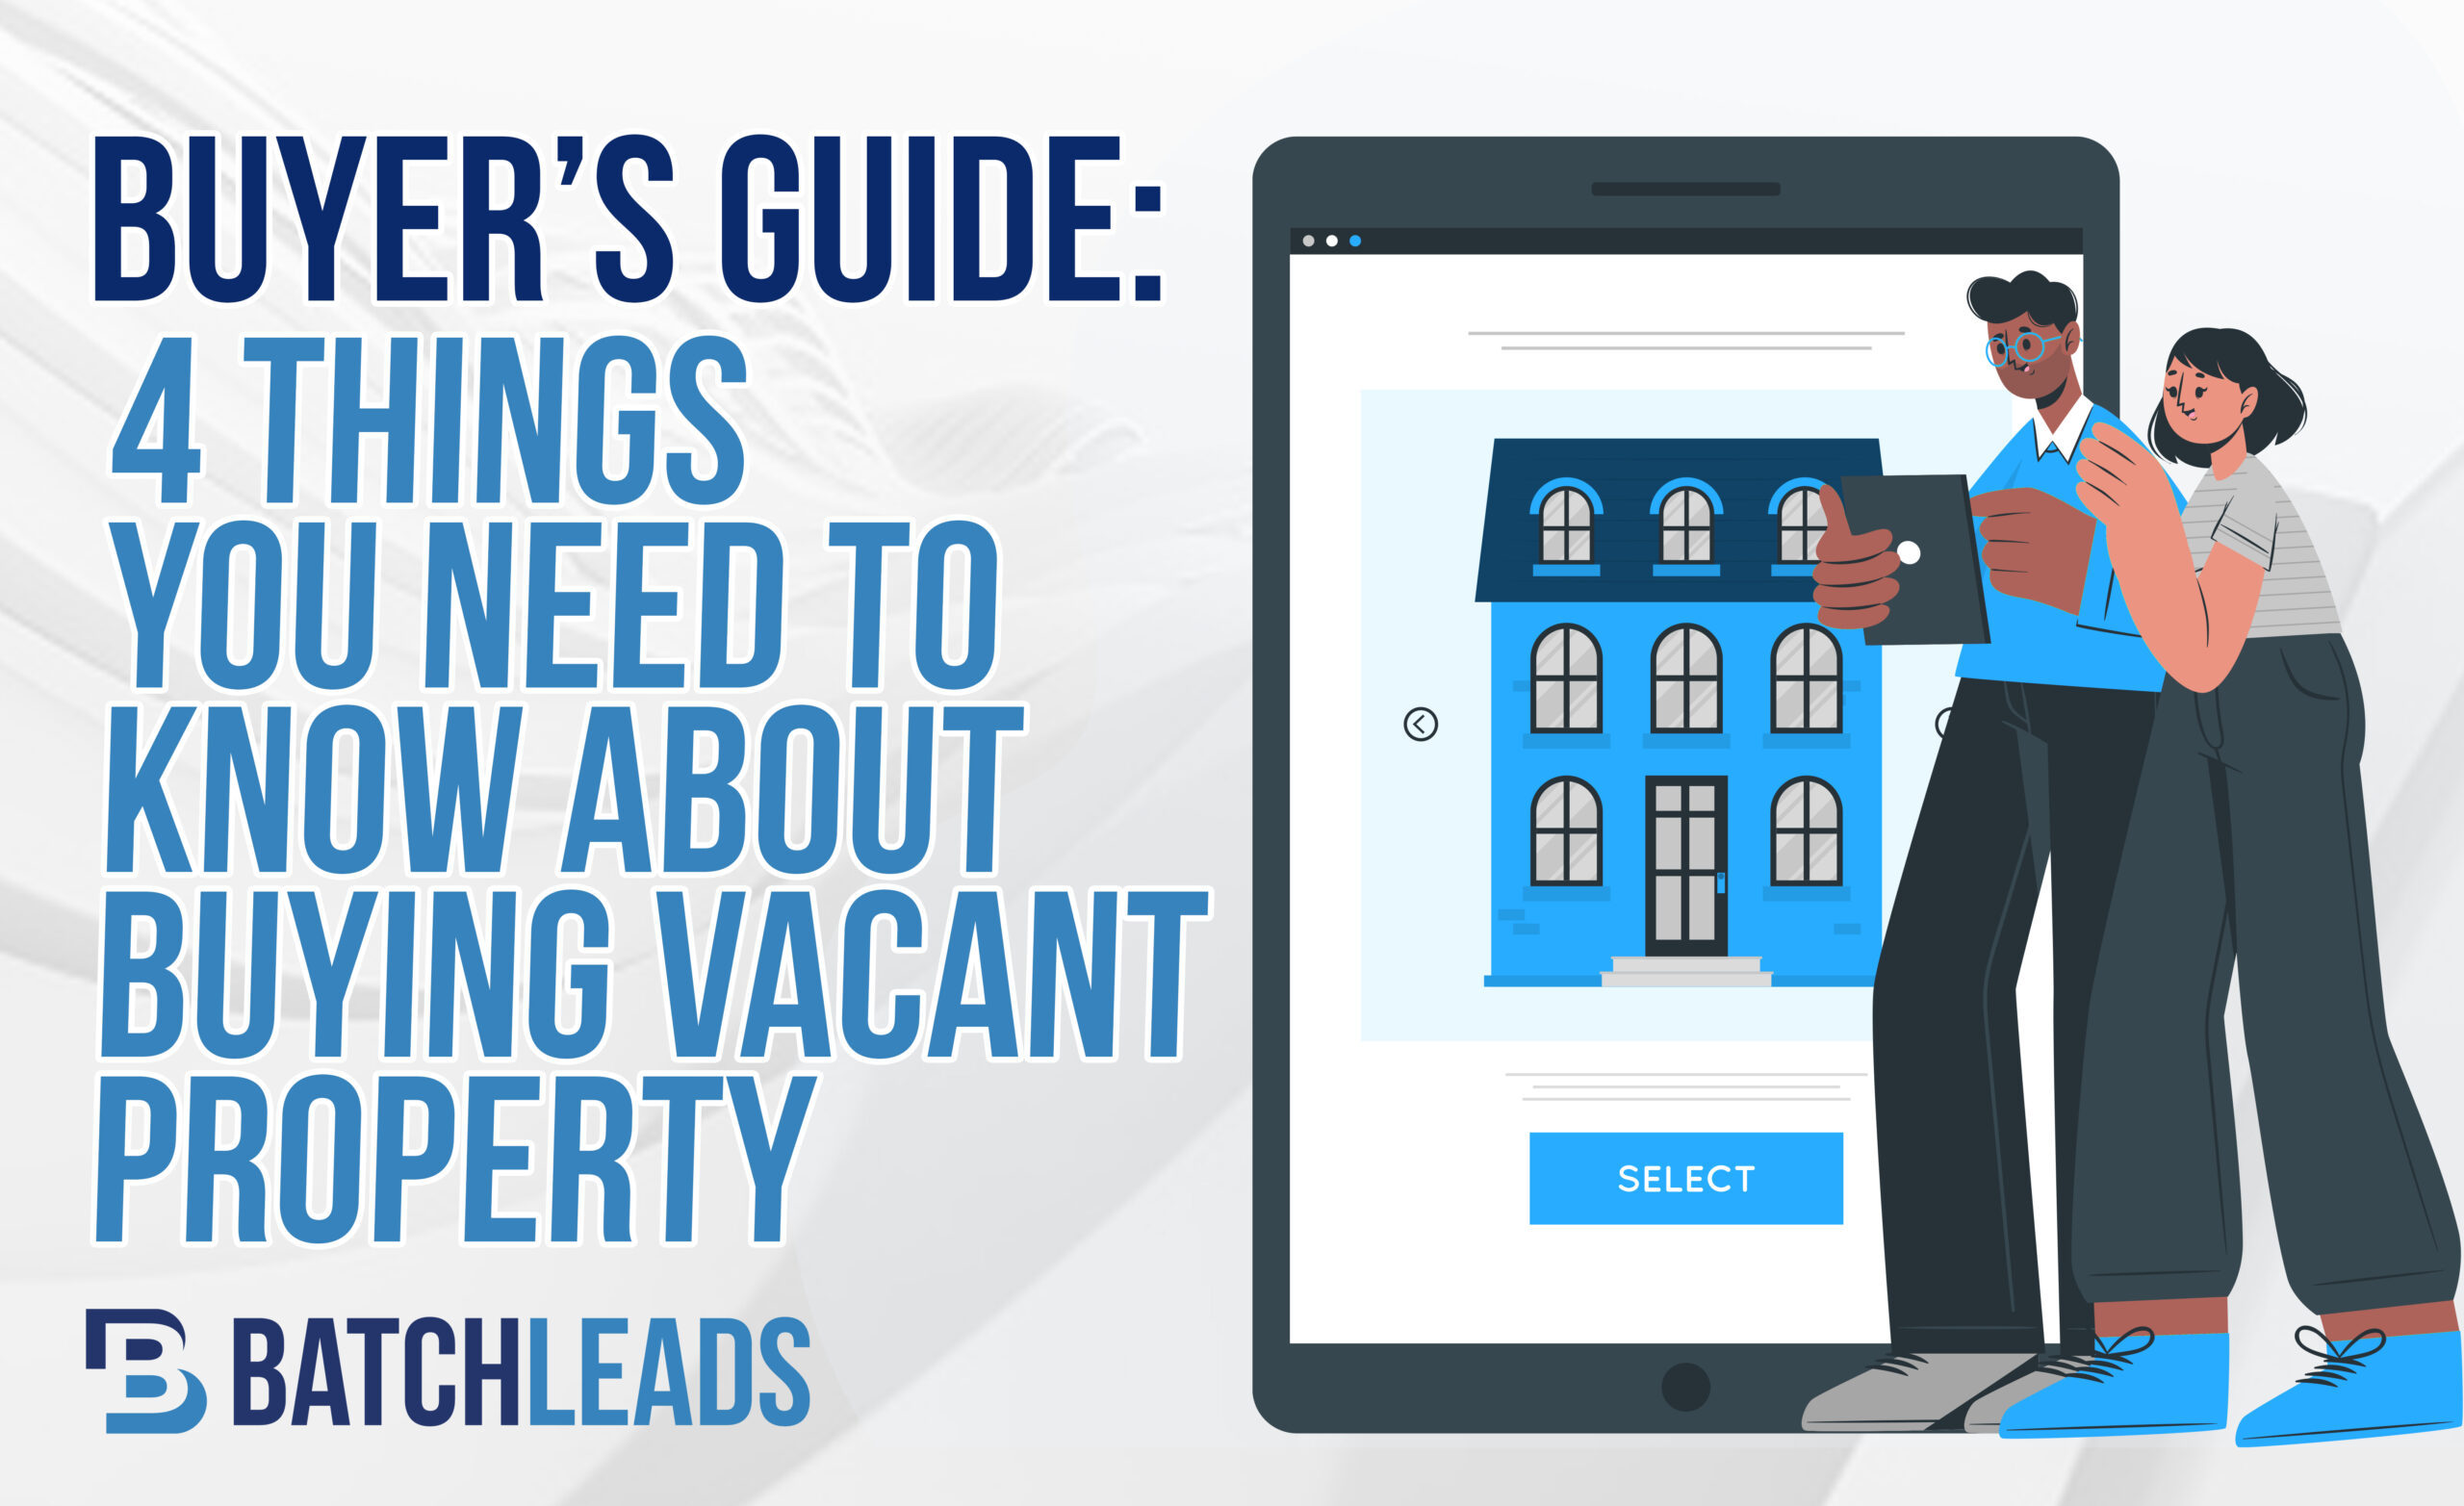 4 Things To Know About Buying Vacant Property